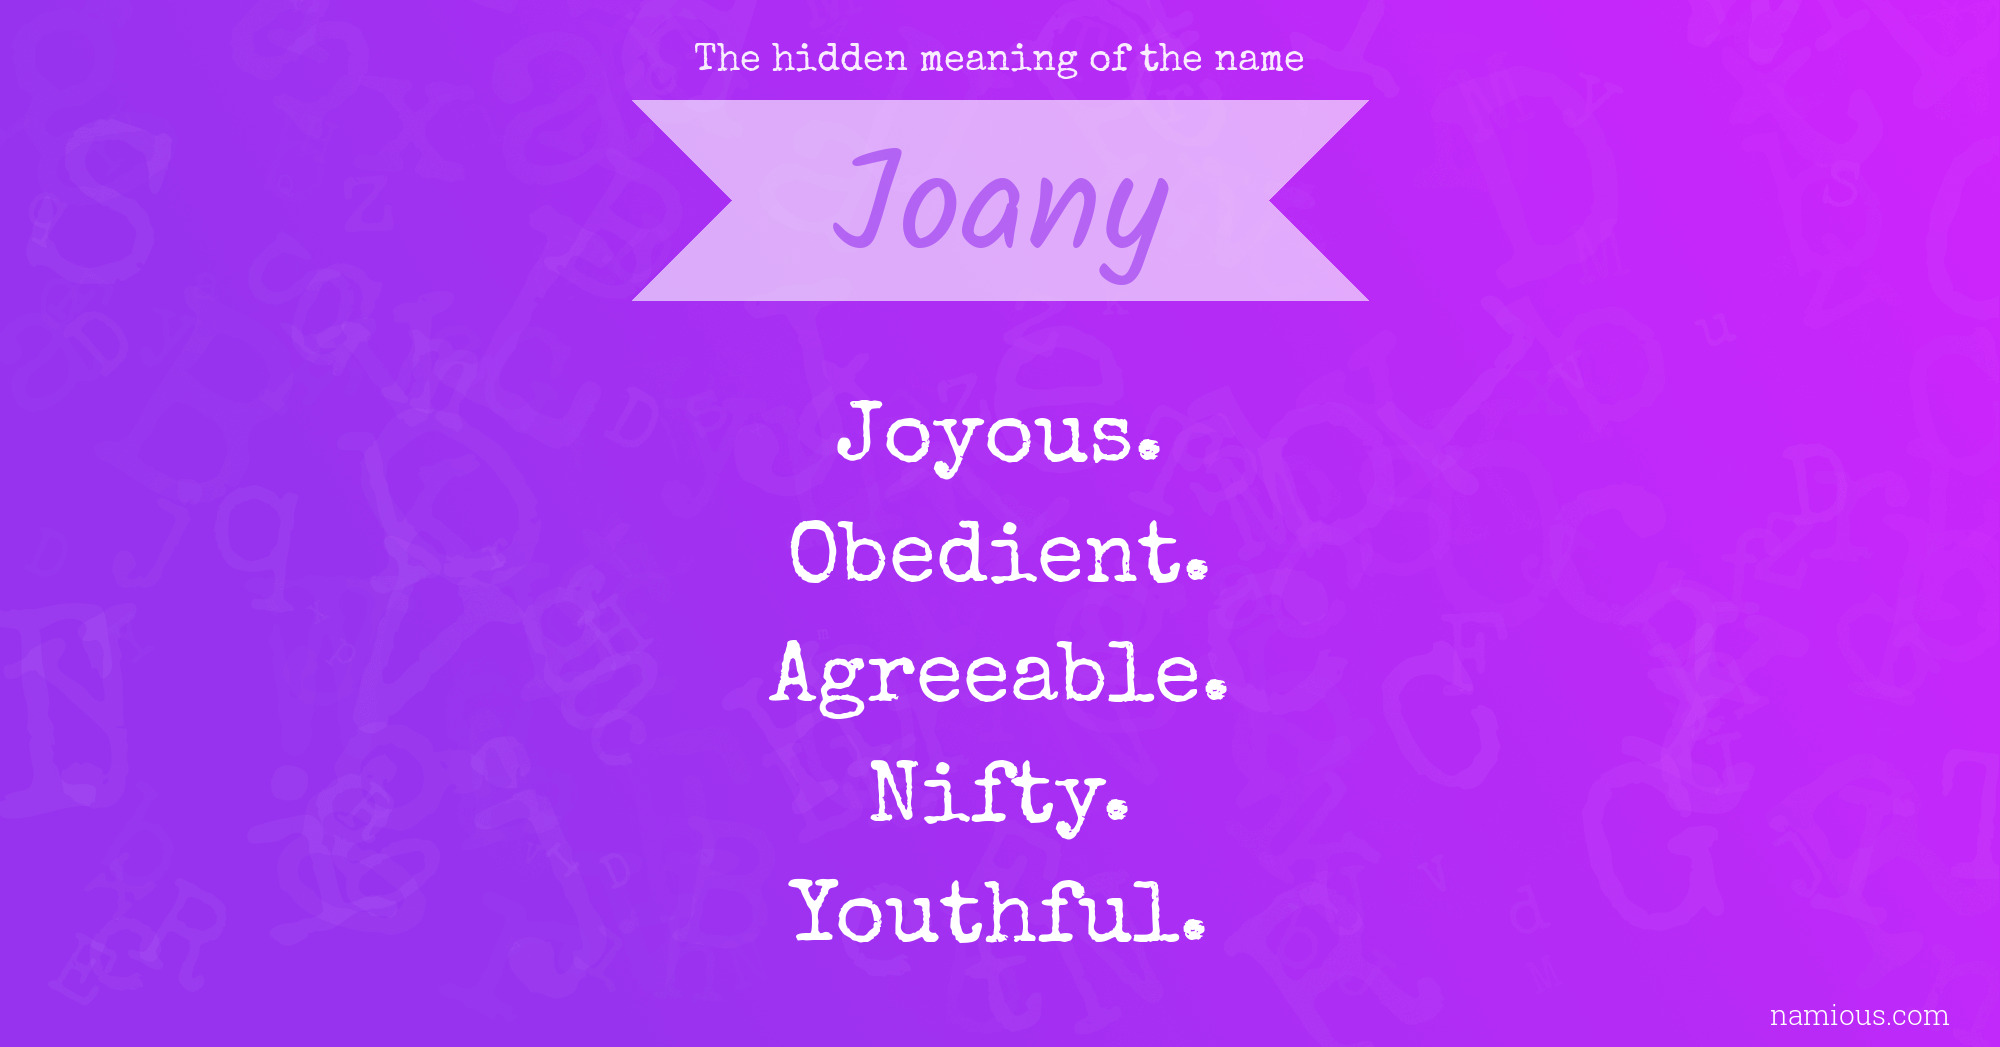 The hidden meaning of the name Joany